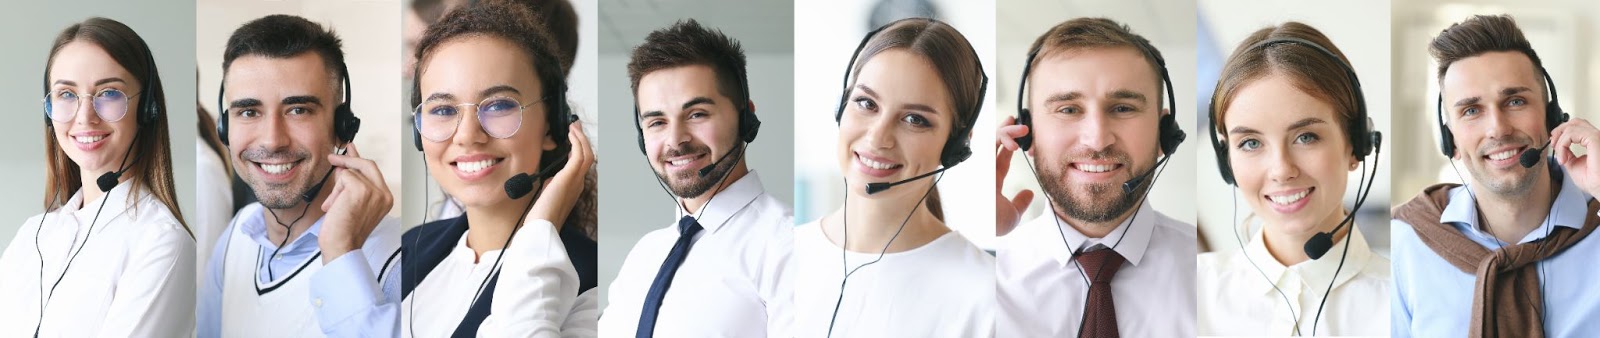 phone answering service professionals